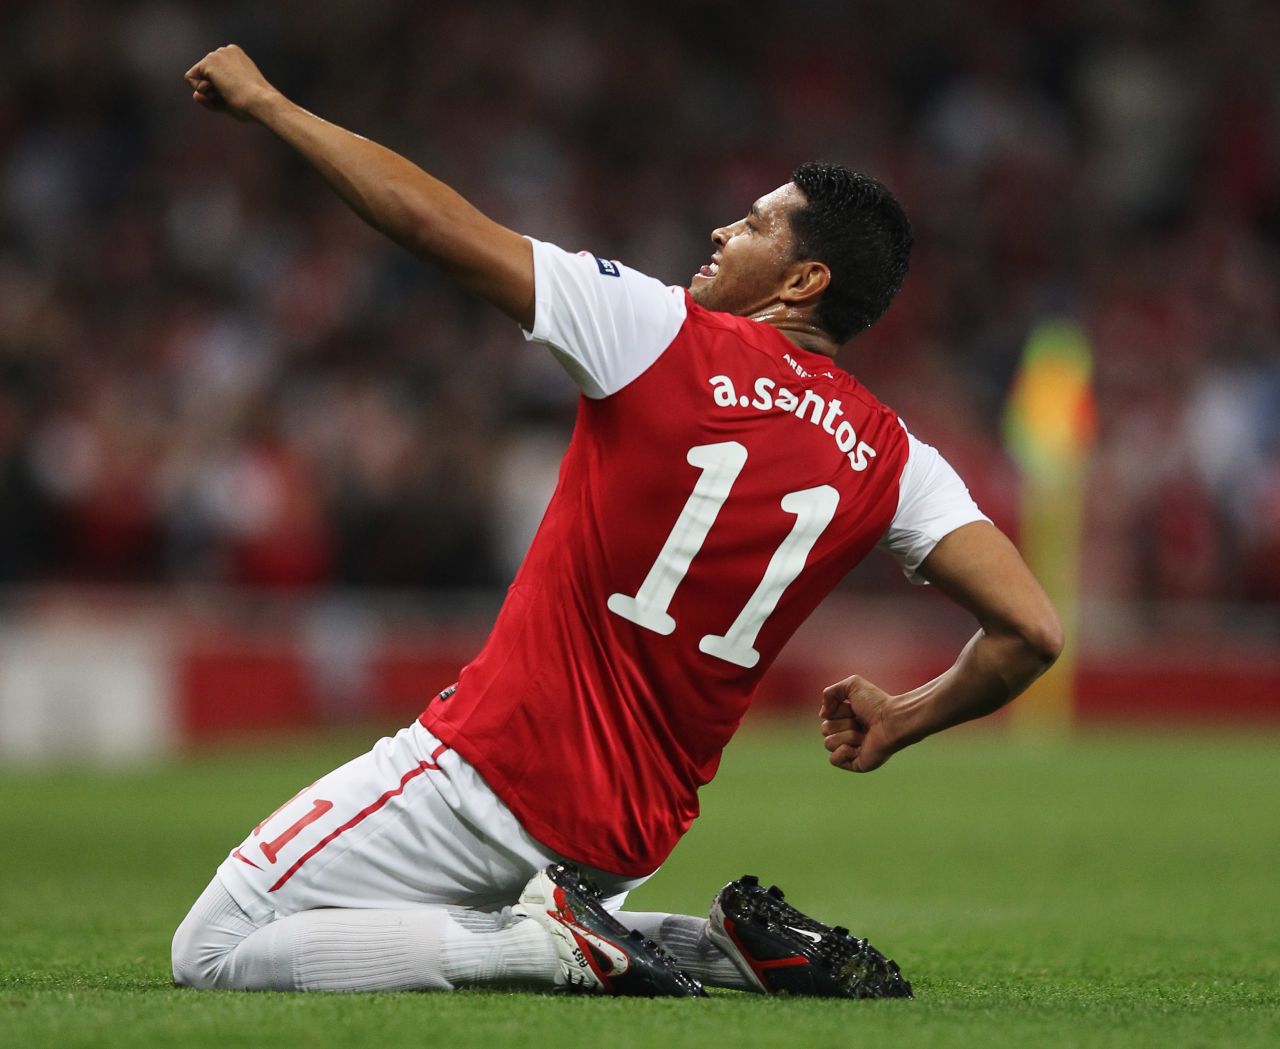 Of all international transfers in 2011, 20% of them involved Brazilian and Argentine players. Brazil accounted for 13% of all international transfers, which equates to 1,500 players. Andre Santos is one such player, after the Brazil left-back moved from Fenerbahce to Arsenal in August.